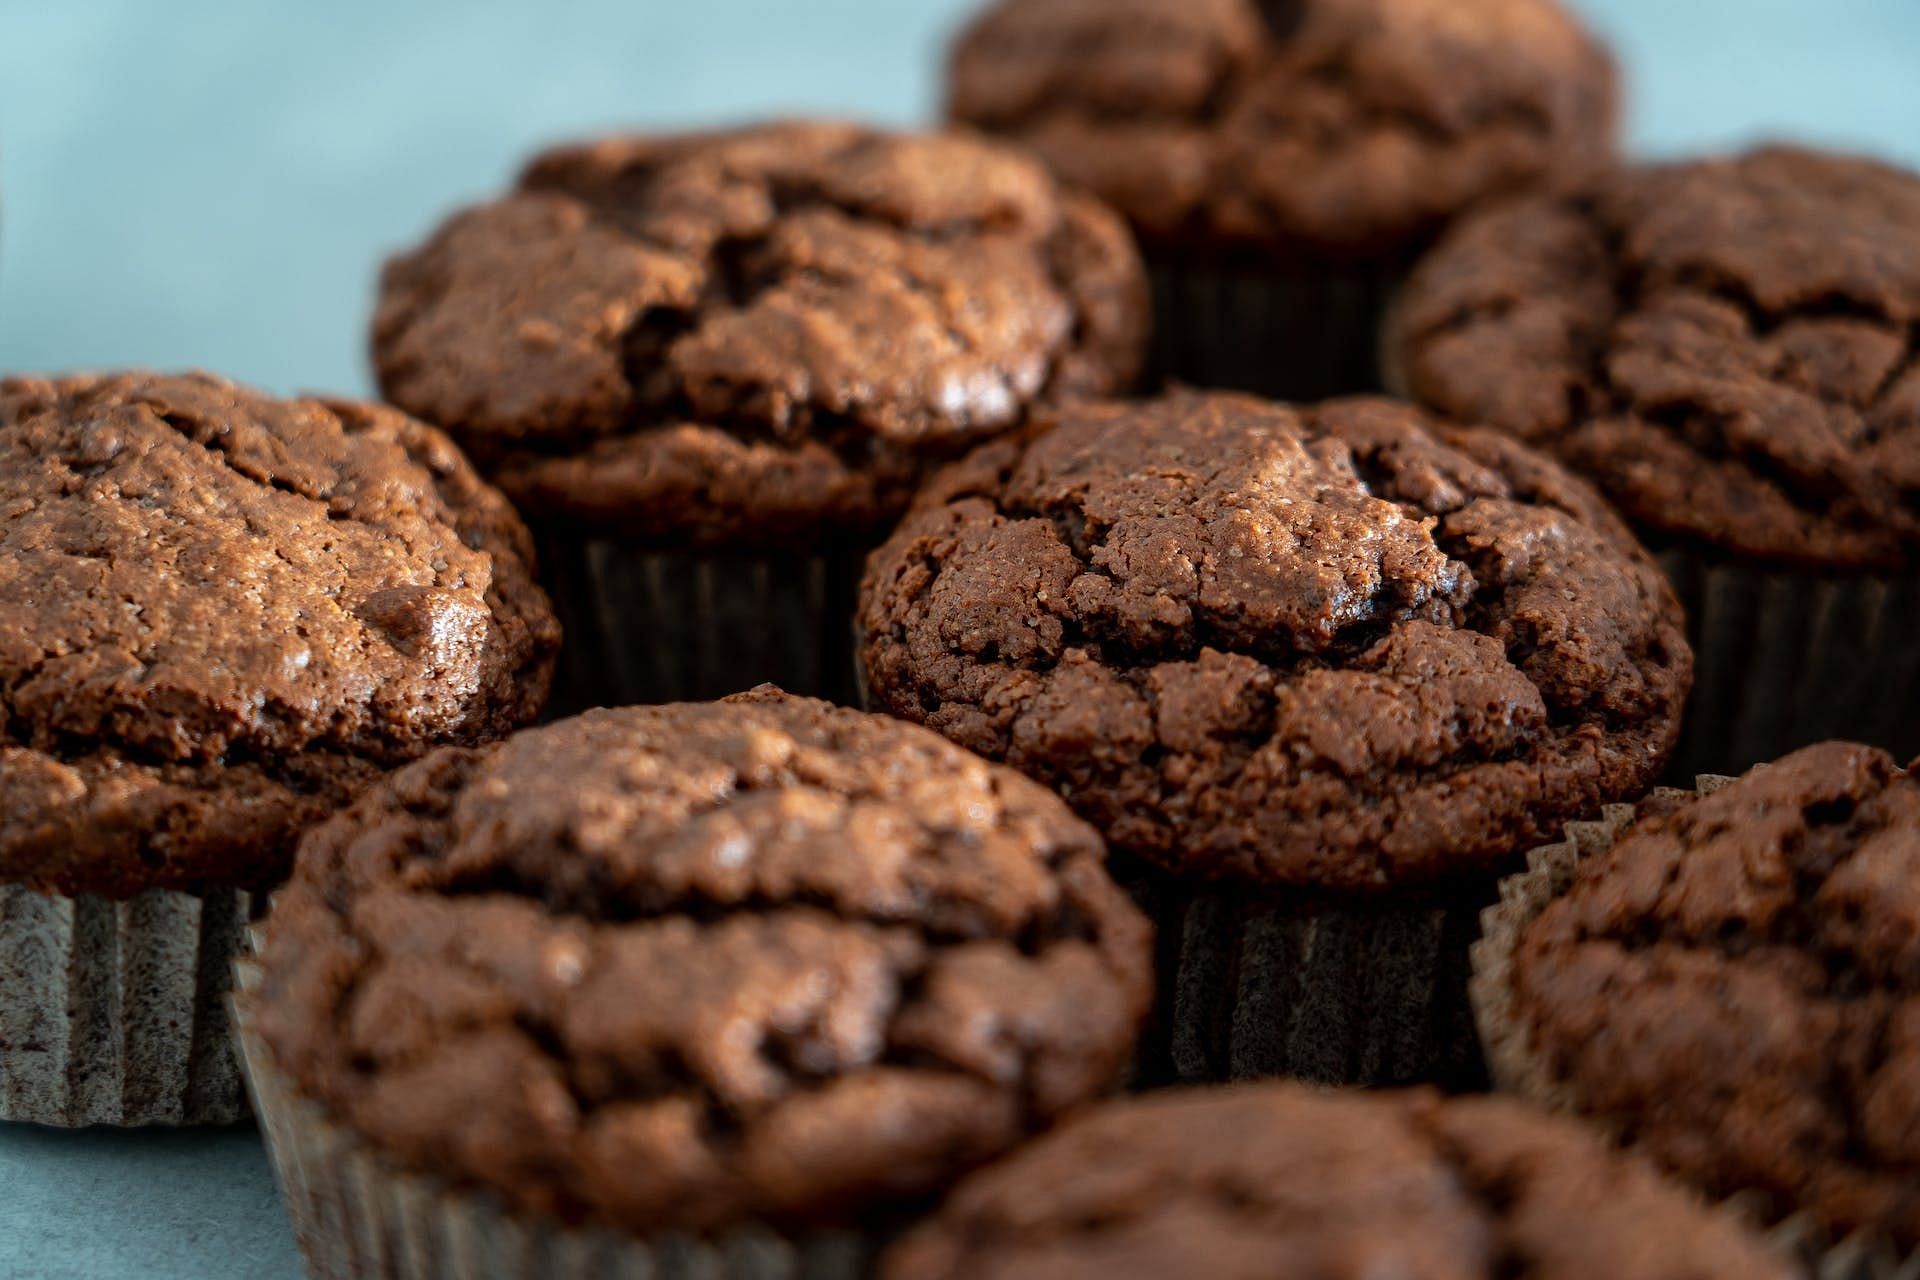 Muffins are worst breakfast foods. (Image via Pexels/Castorly Stock)